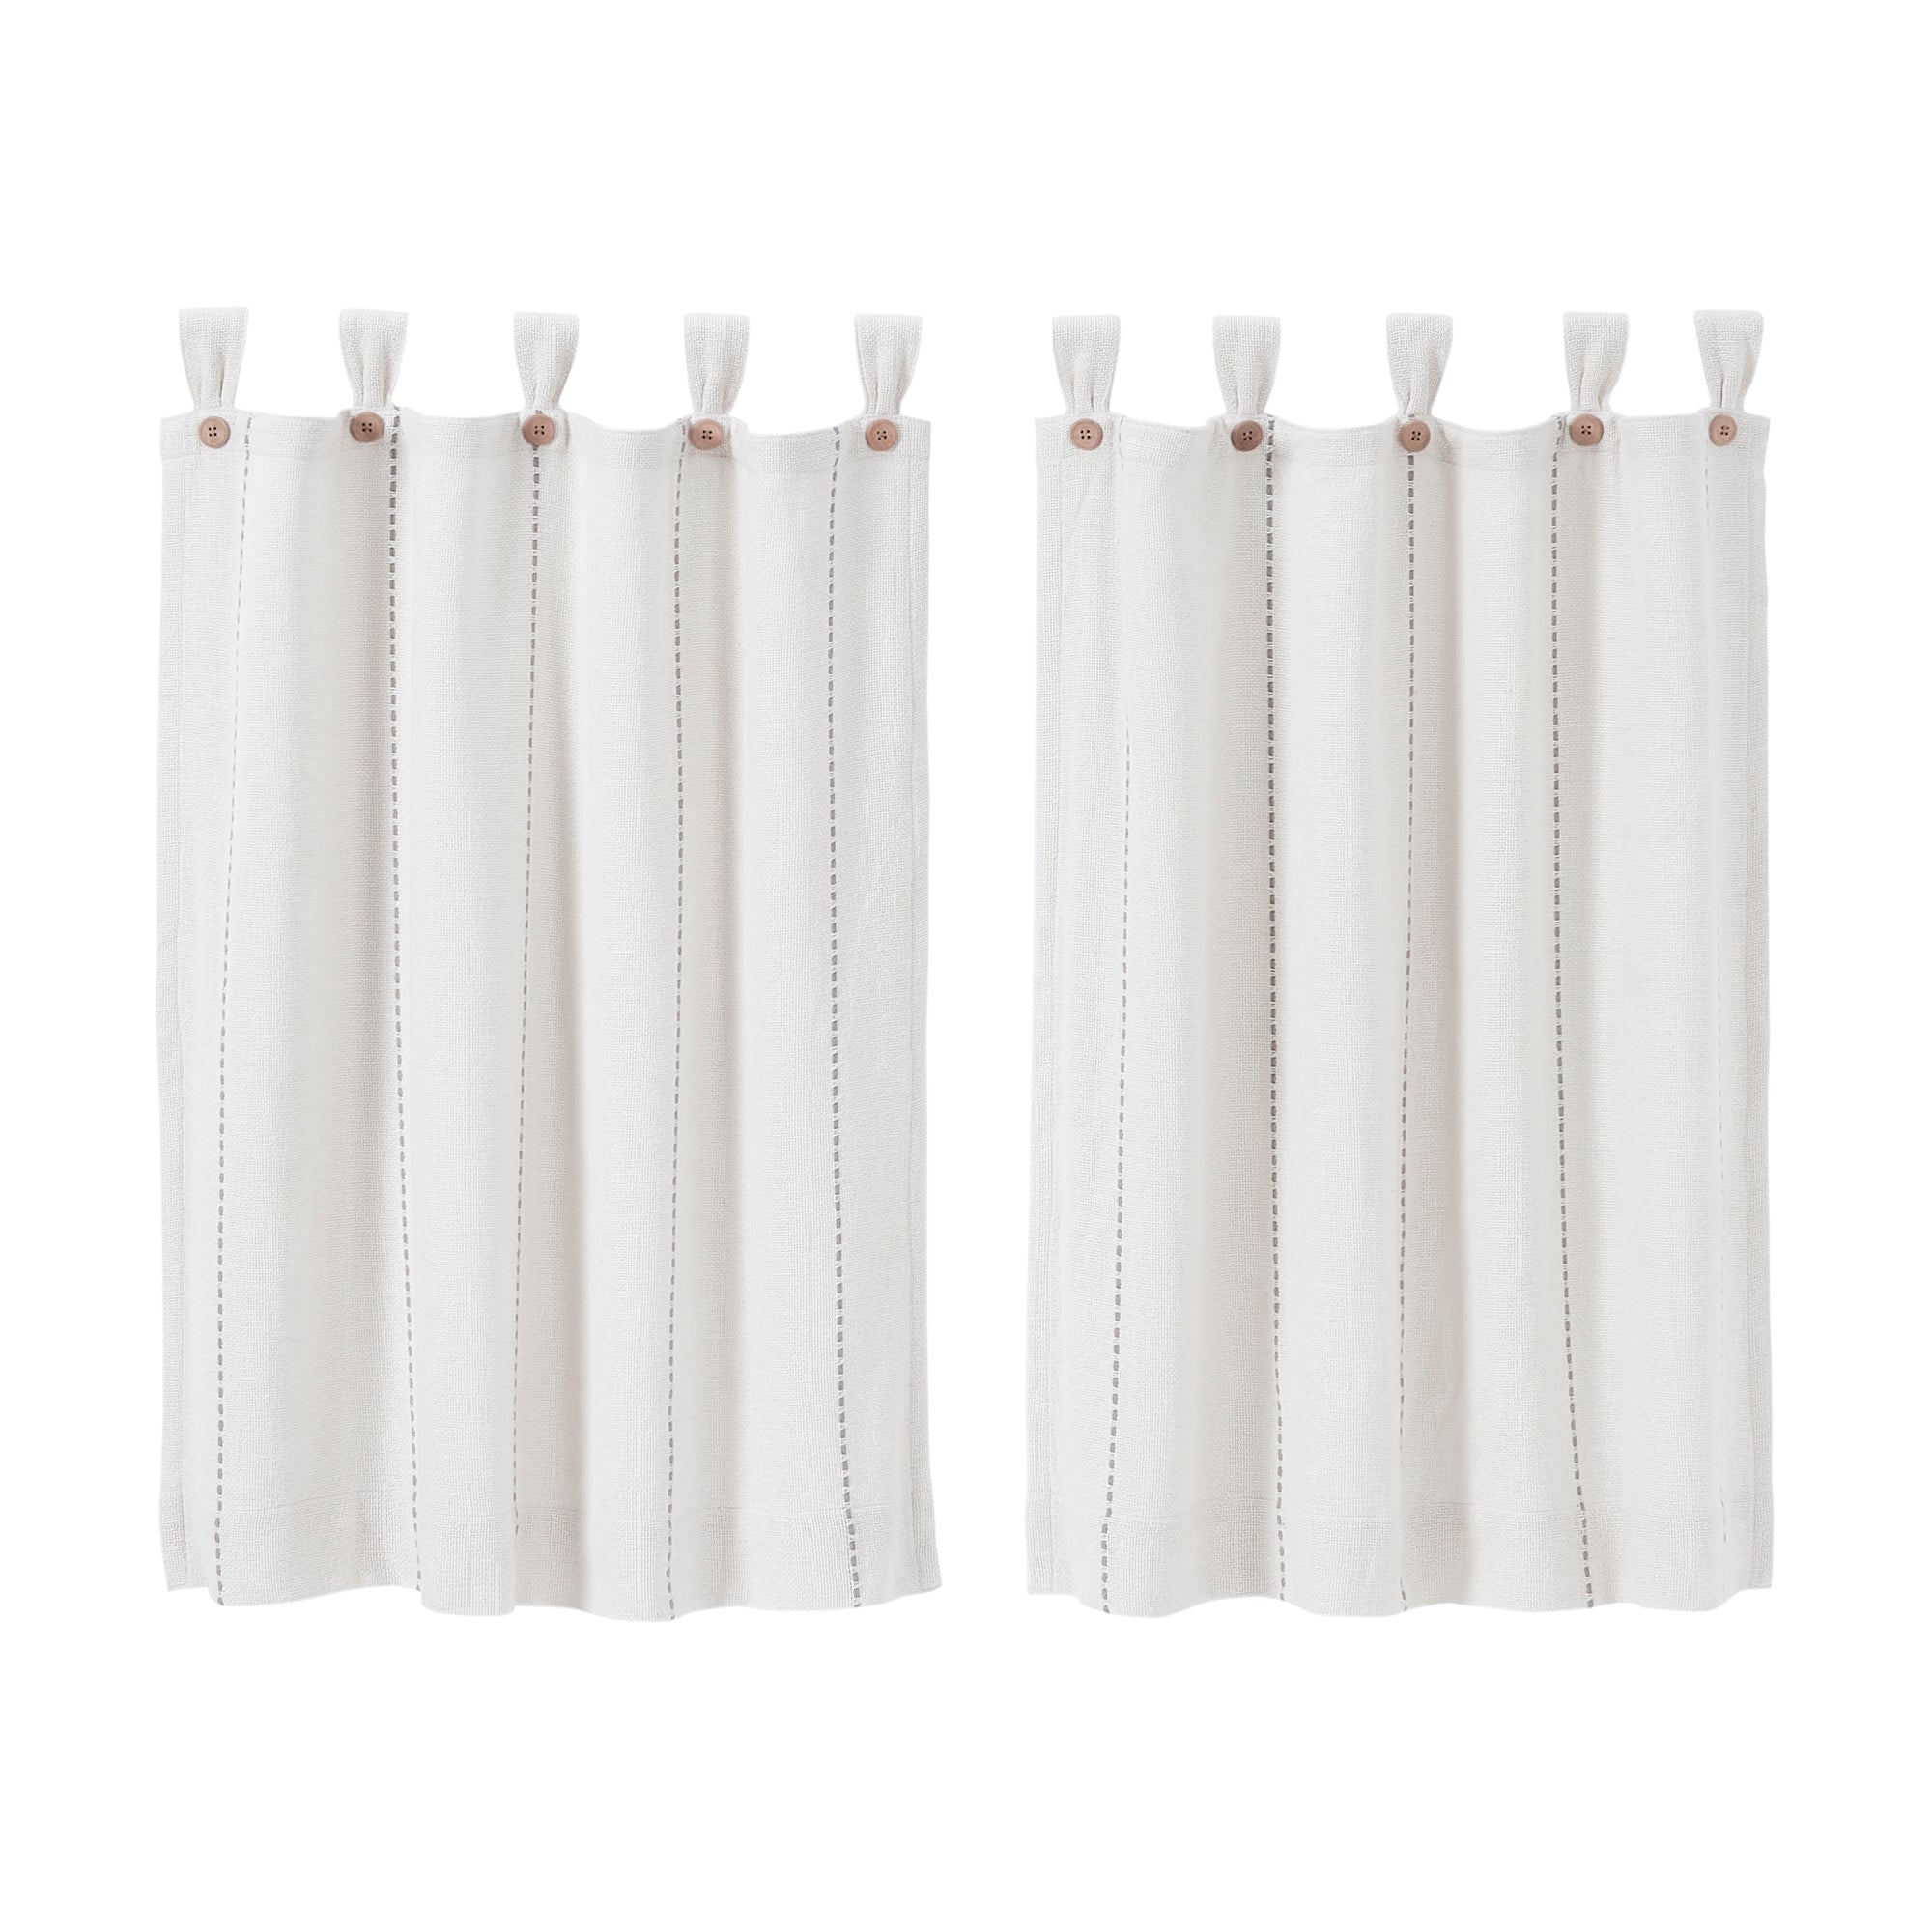 Stitched Burlap White Tier Curtain Set of 2 L36xW36